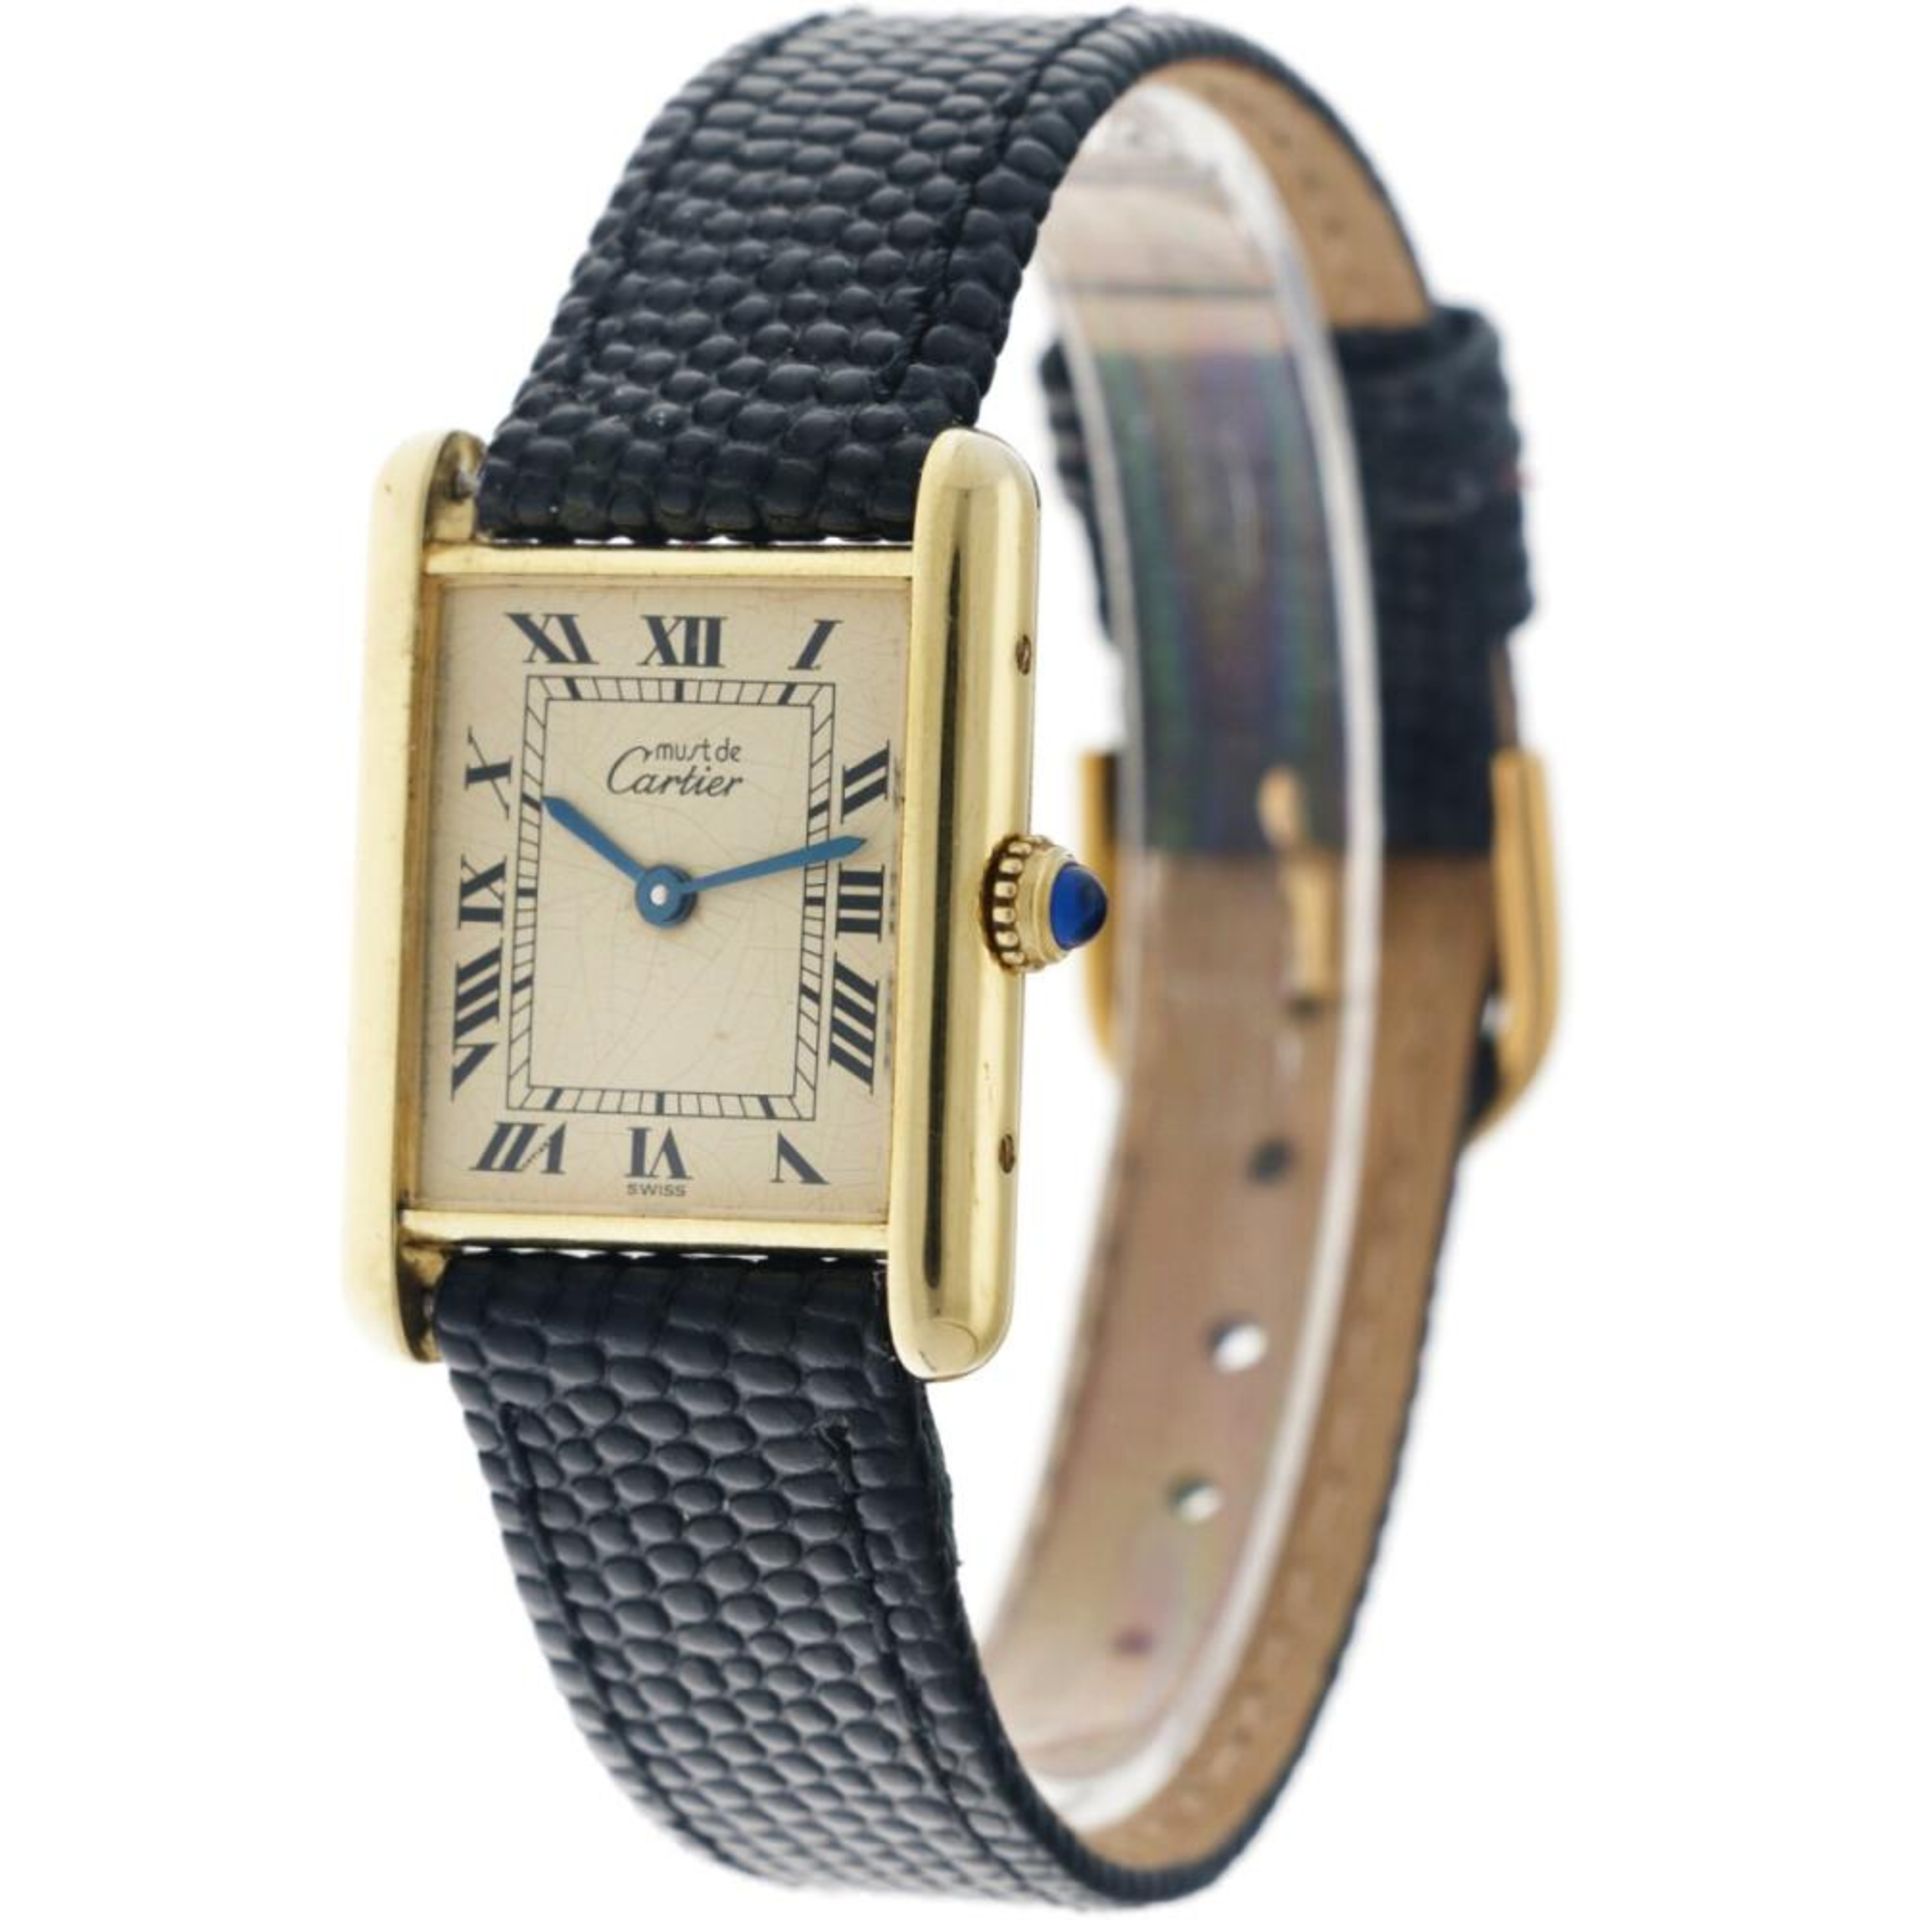 Cartier Tank 81006 - Ladies watch - approx. 1985. - Image 2 of 5